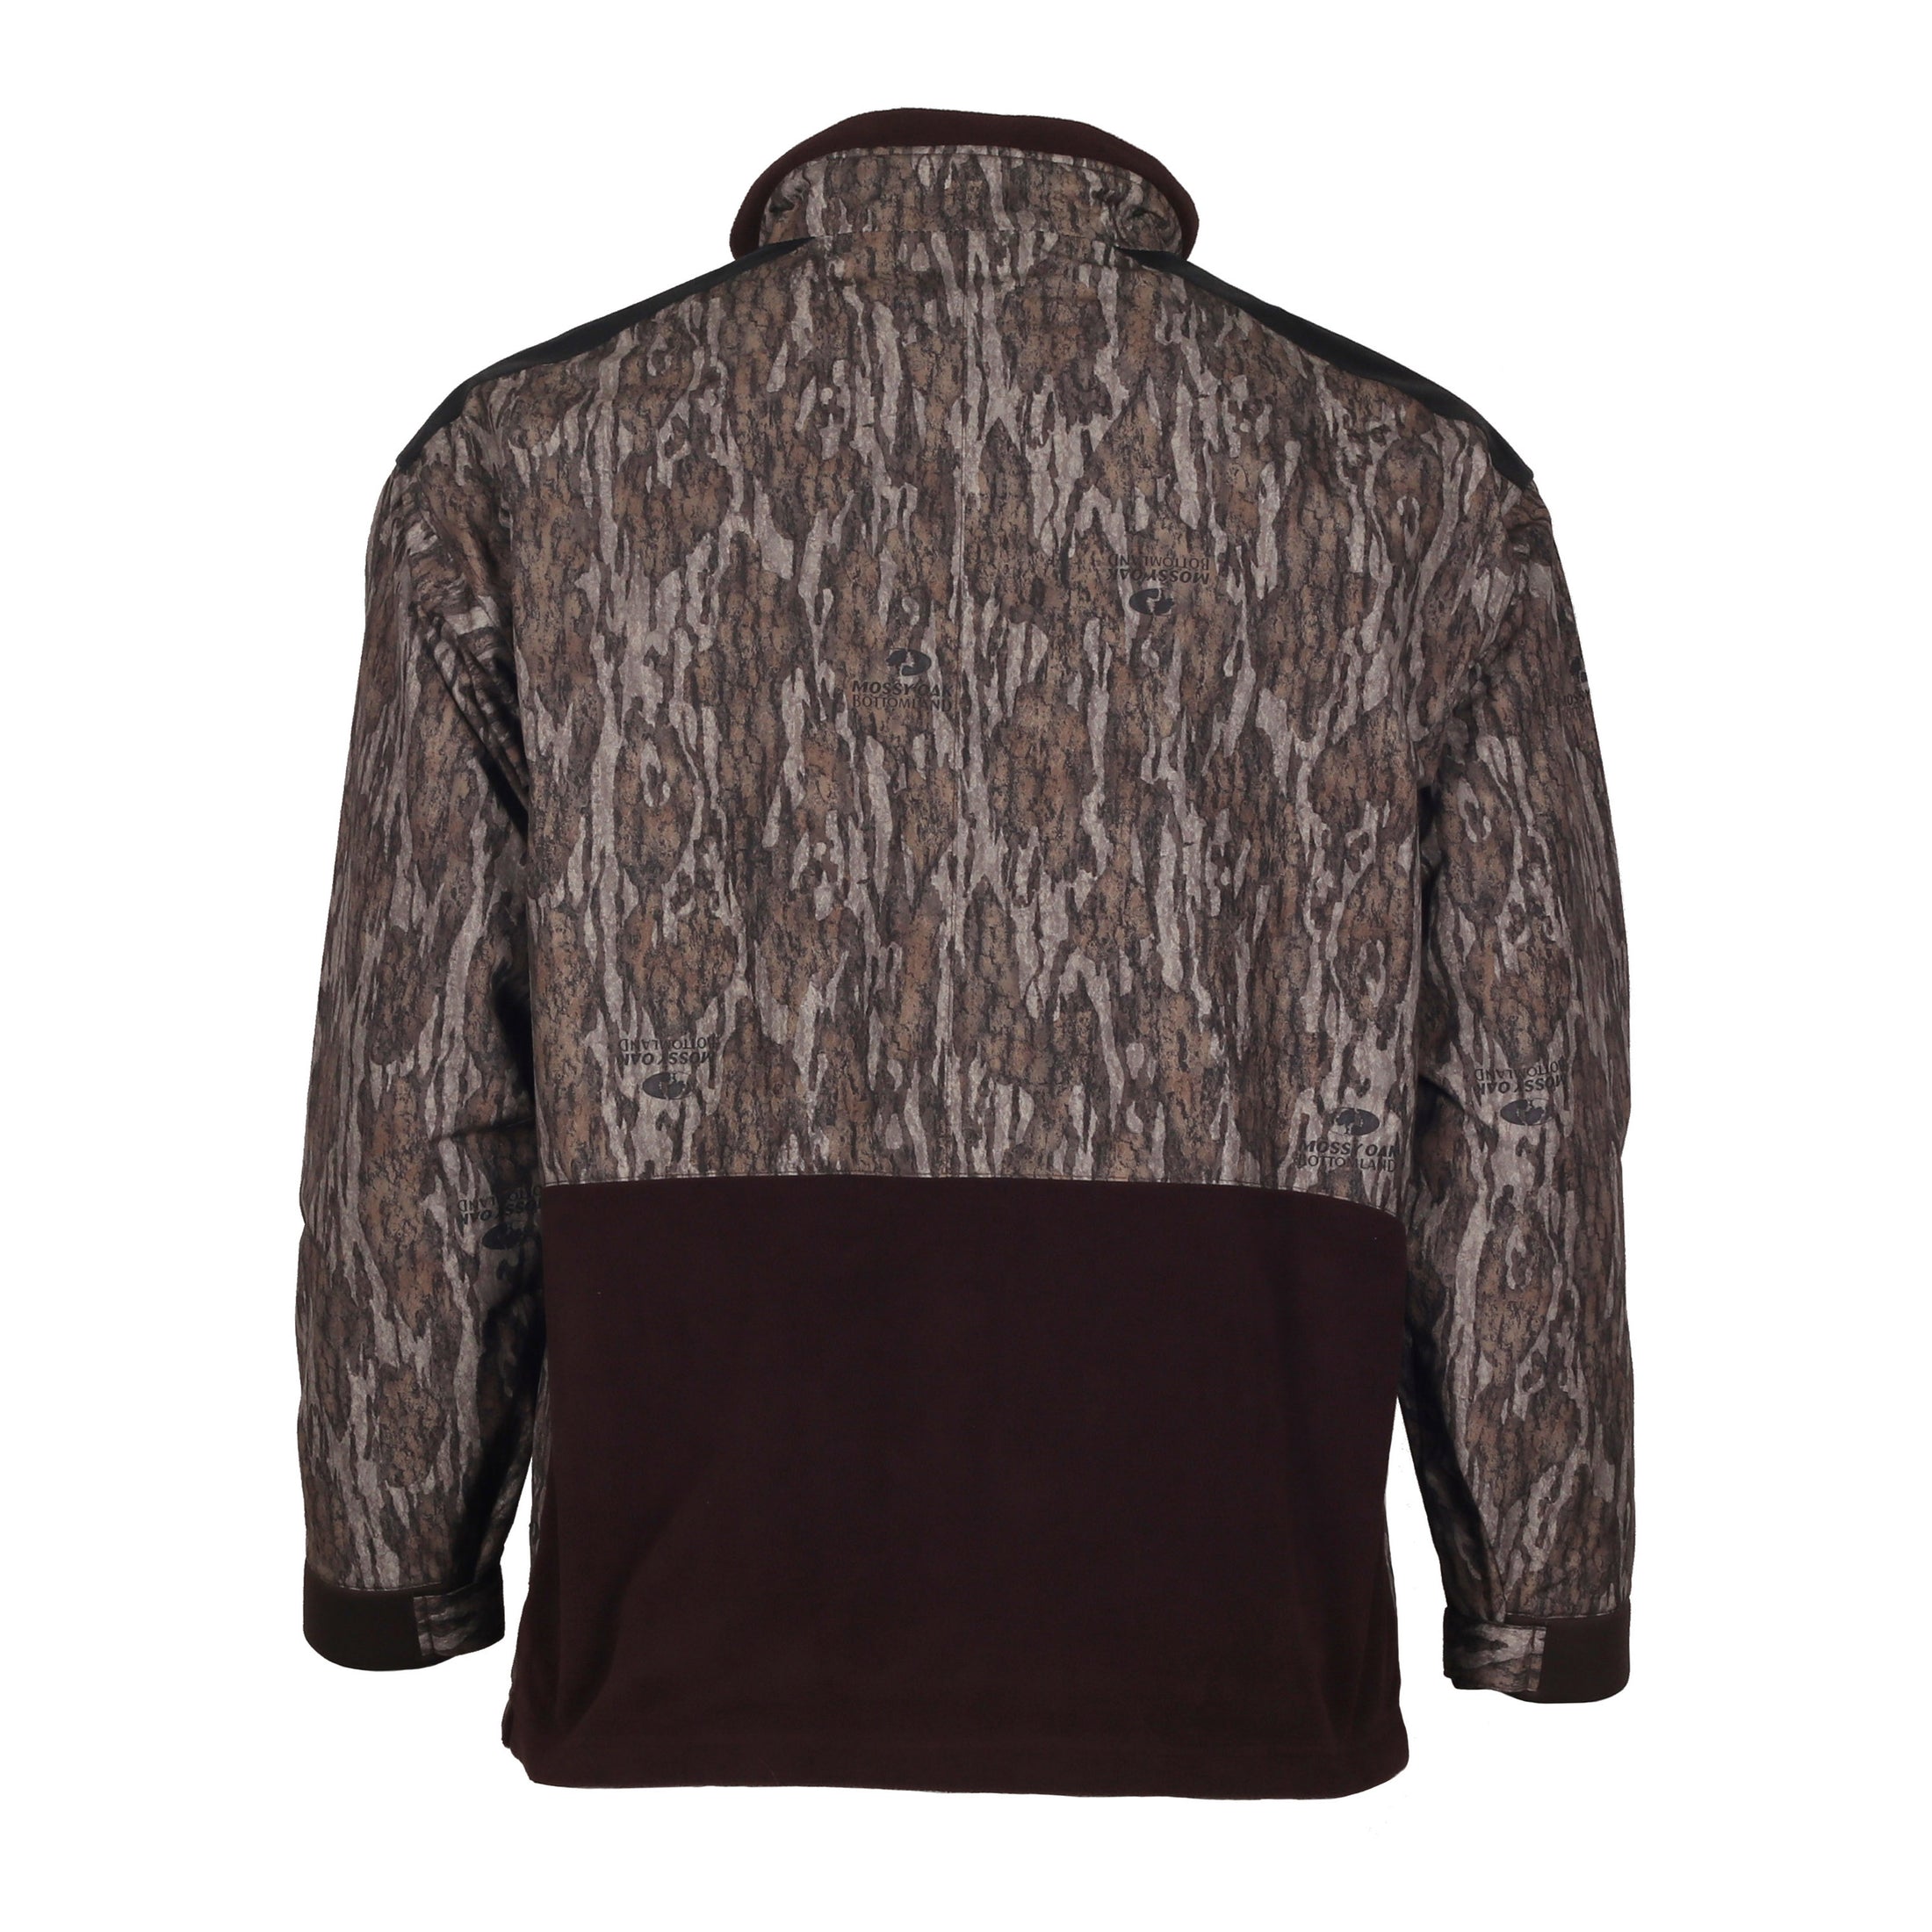 gamehide Marsh Lord Pullover back (mossy oak new bottomland)